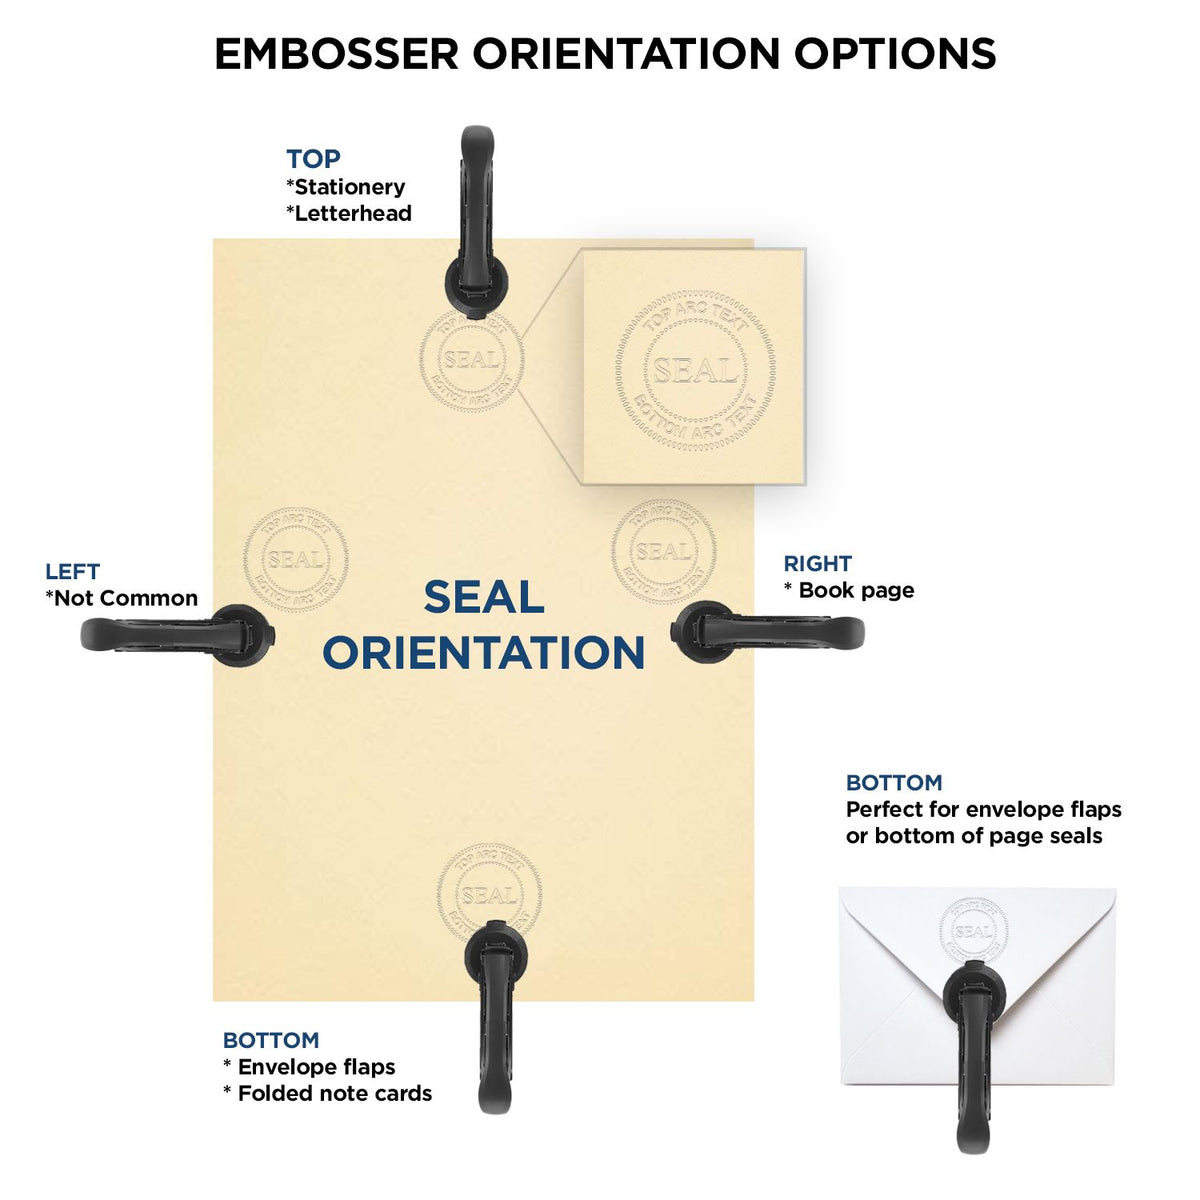 An infographic for the State of Michigan Architectural Seal Embosser showing embosser orientation, this is showing examples of a top, bottom, right and left insert.